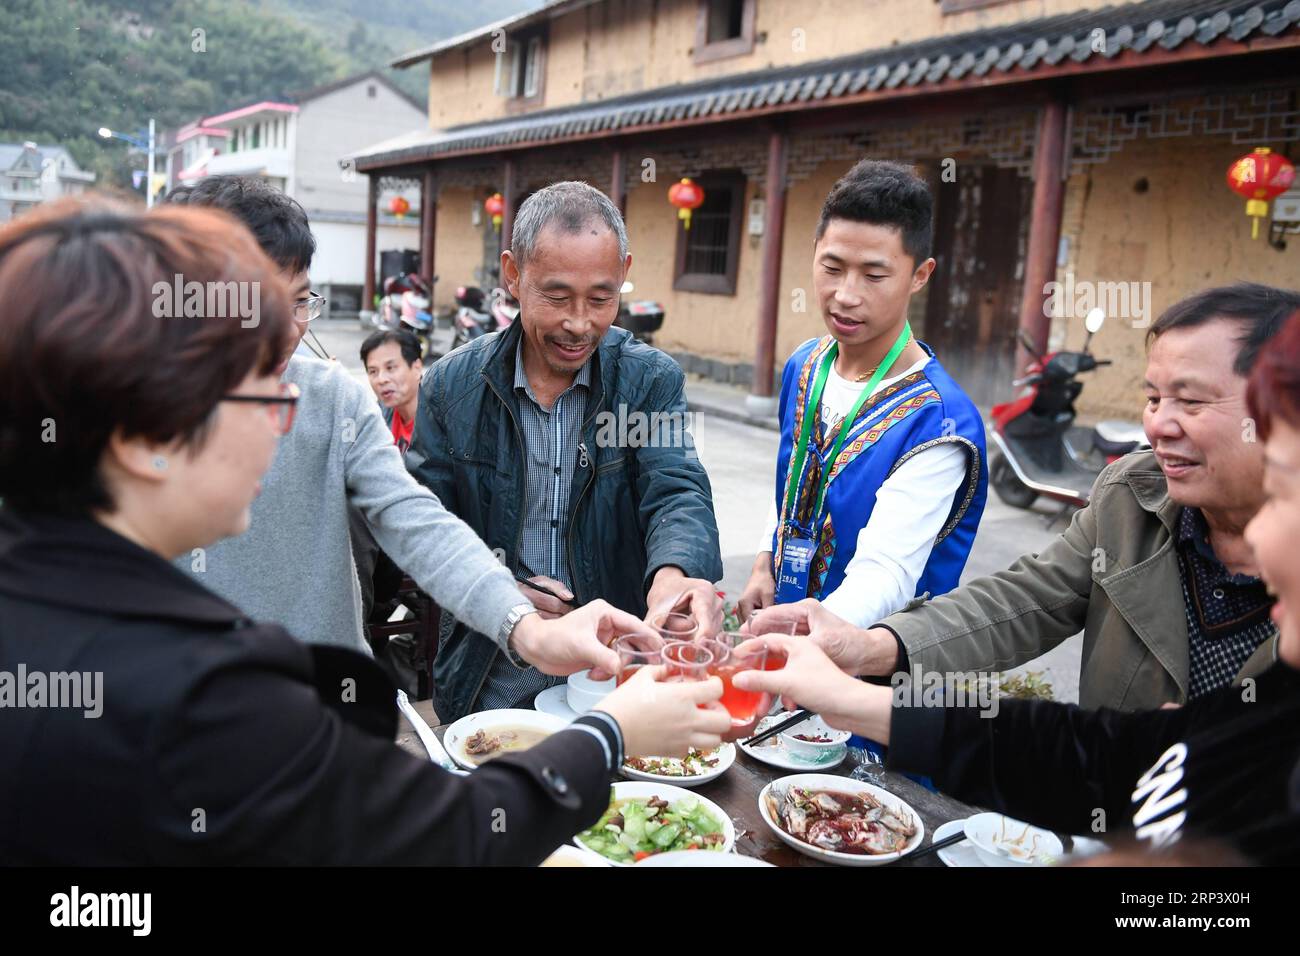 (181018) -- TONGLU, Oct. 18, 2018 (Xinhua) -- Local residents and tourists enjoy the long-table banquet held at Longfeng Ethnic Village in Eshan Township of the She ethnic group of Tonglu County, east China s Zhejiang Province, Oct. 17, 2018. A total of 100 tables of delicacies were presented at the long-table banquet along a street held at the village, attracting local residents as well as tourists to enjoy the food of the She ethnic group. (Xinhua/Huang Zongzhi)(sxk) CHINA-ZHEJIANG-TONGLU-LONG-TABLE BANQUET (CN) PUBLICATIONxNOTxINxCHN Stock Photo